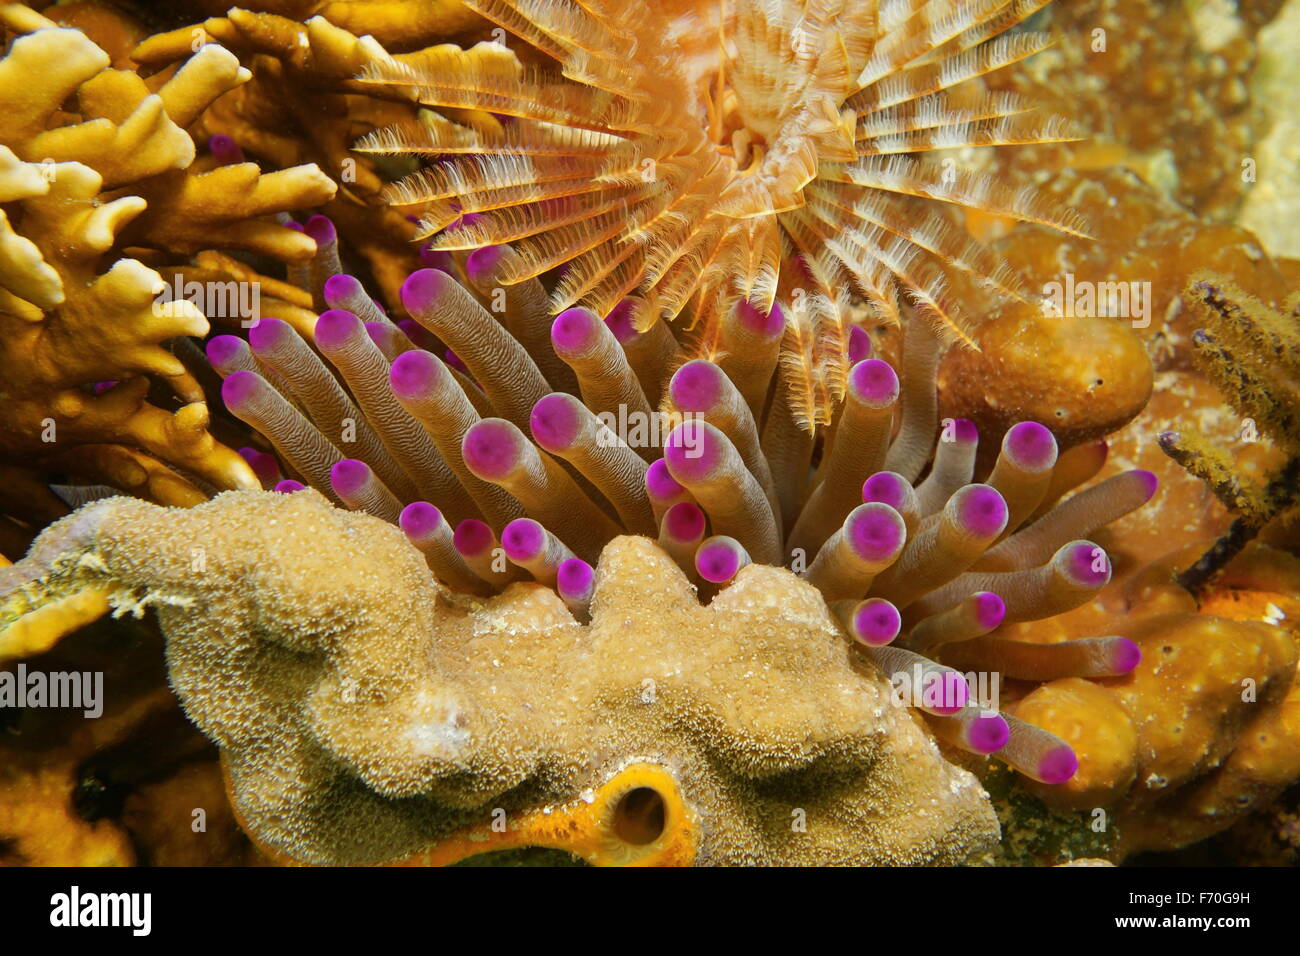 Underwater marine life, tentacles of giant Caribbean sea anemone between coral and a feather duster worm, Mexico Stock Photo